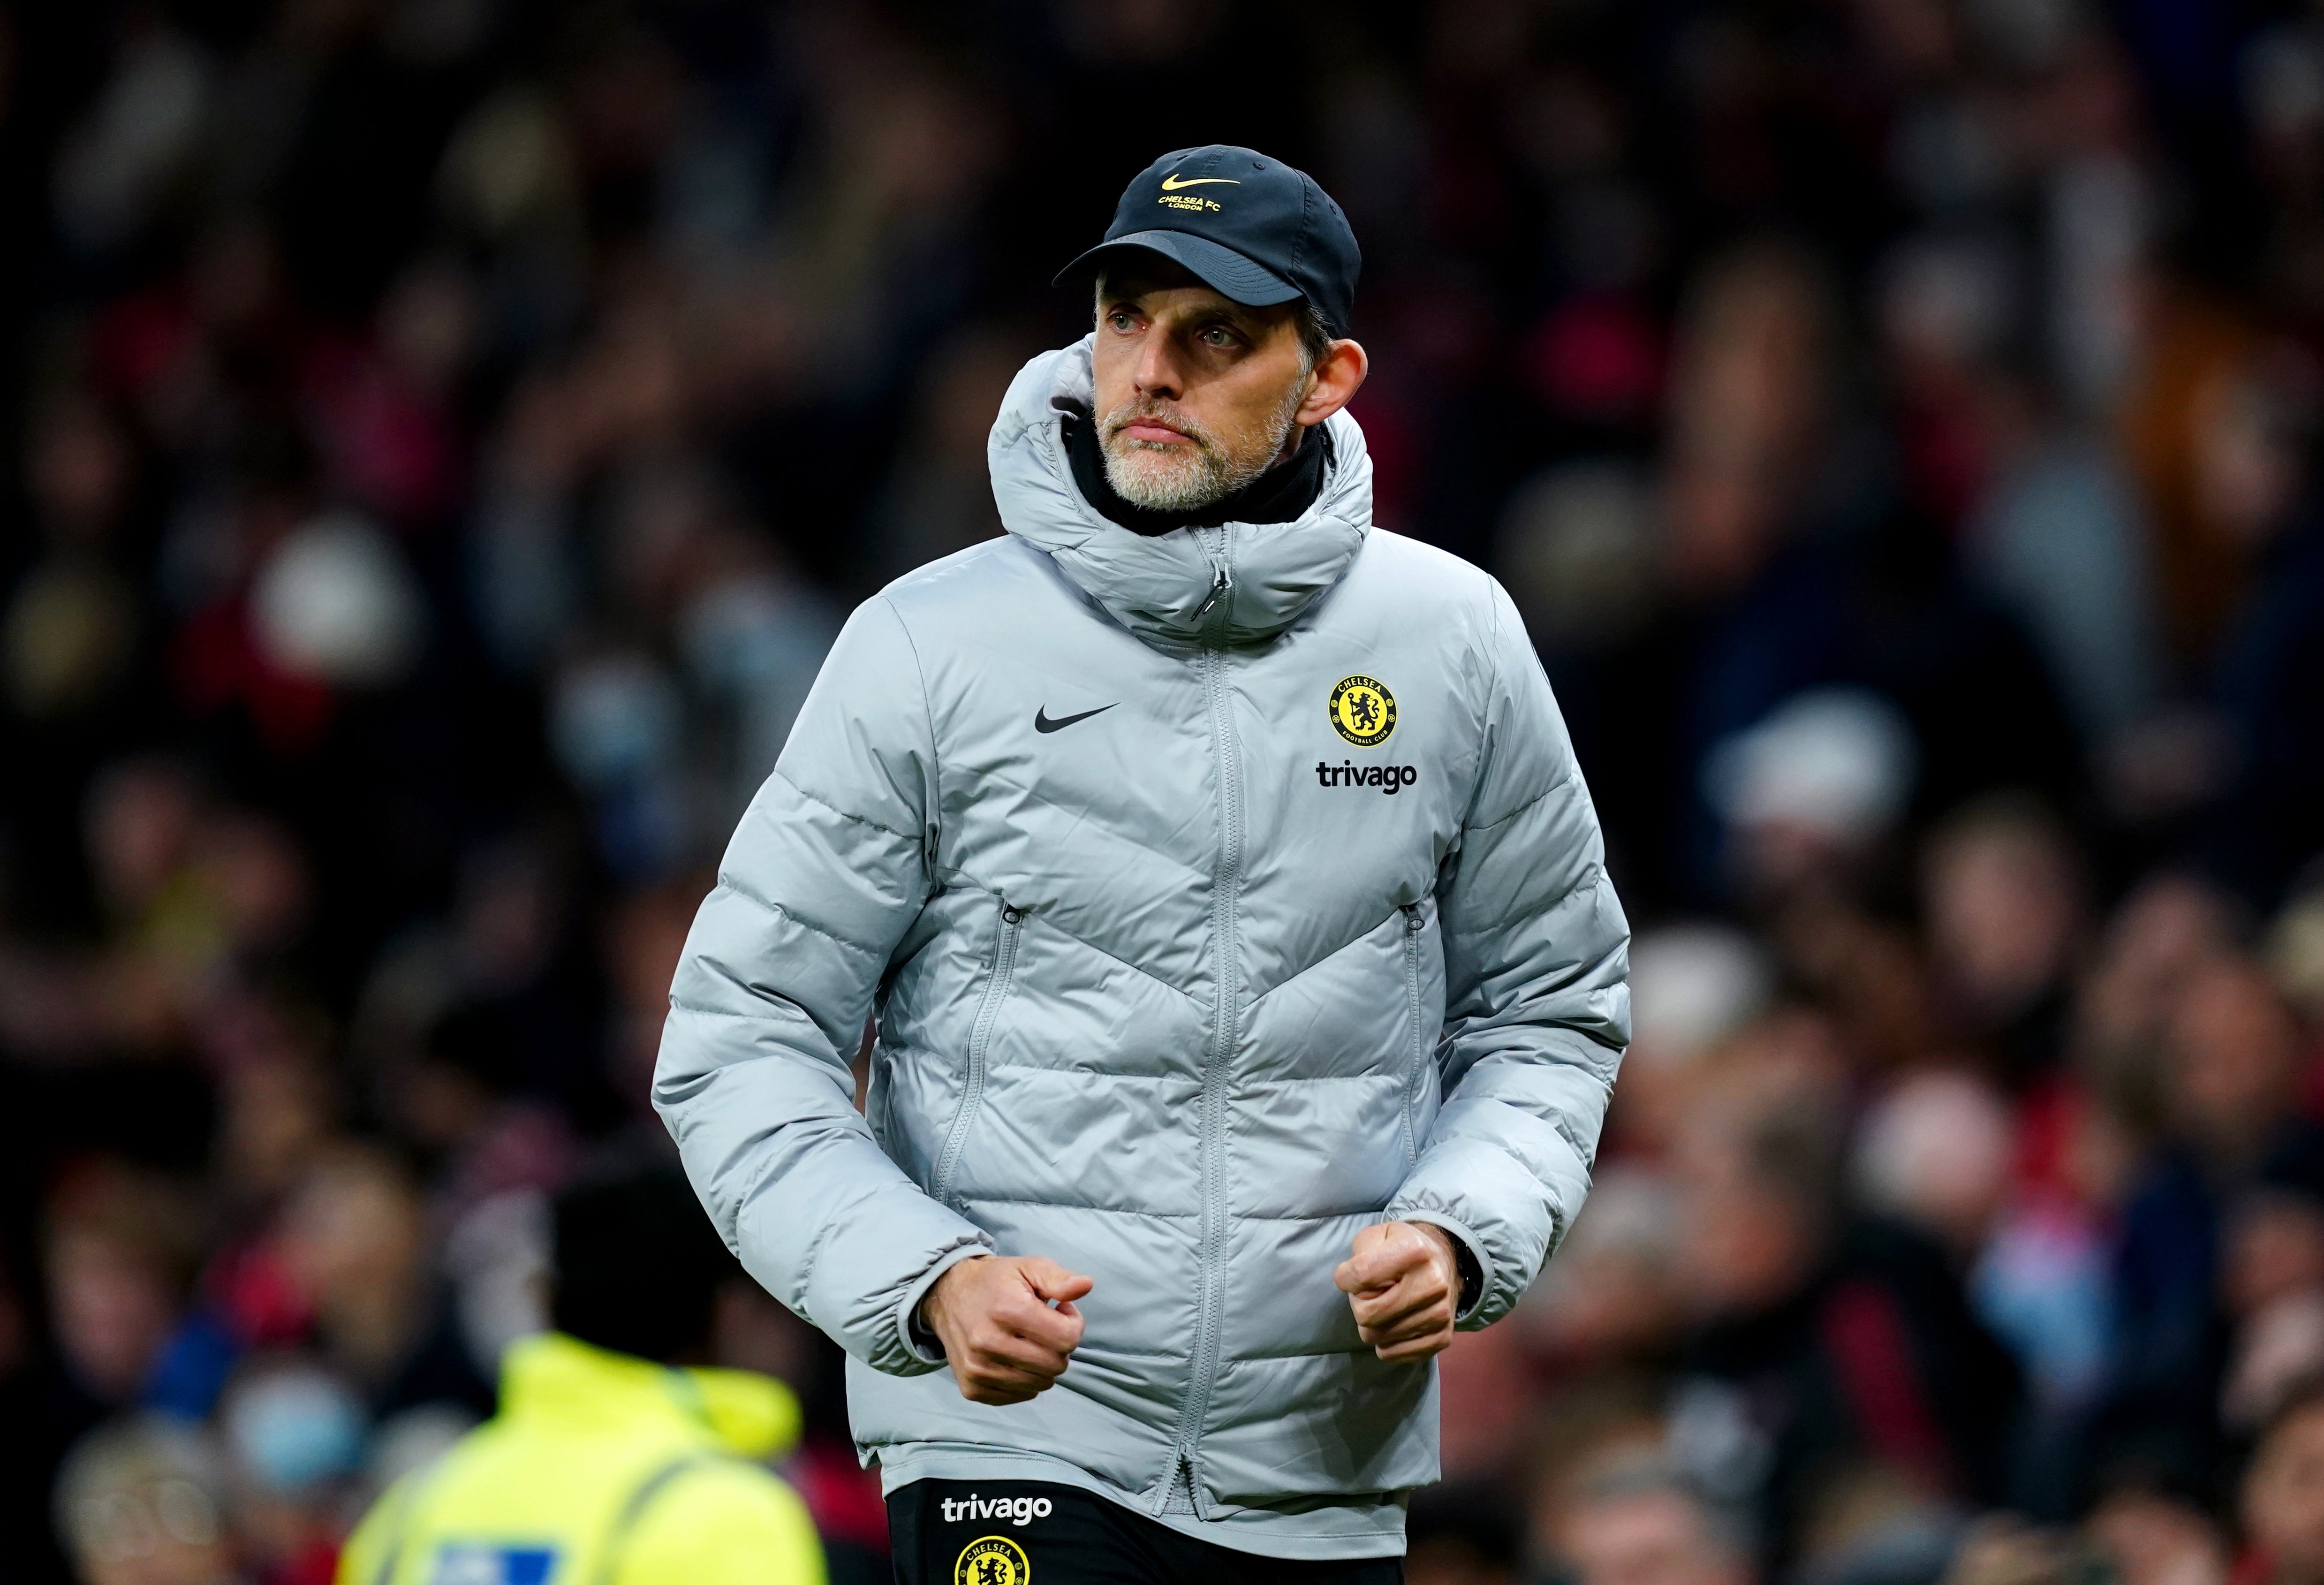 Thomas Tuchel, pictured, is looking forward to his first meeting with Frank Lampard (Martin Rickett/PA)